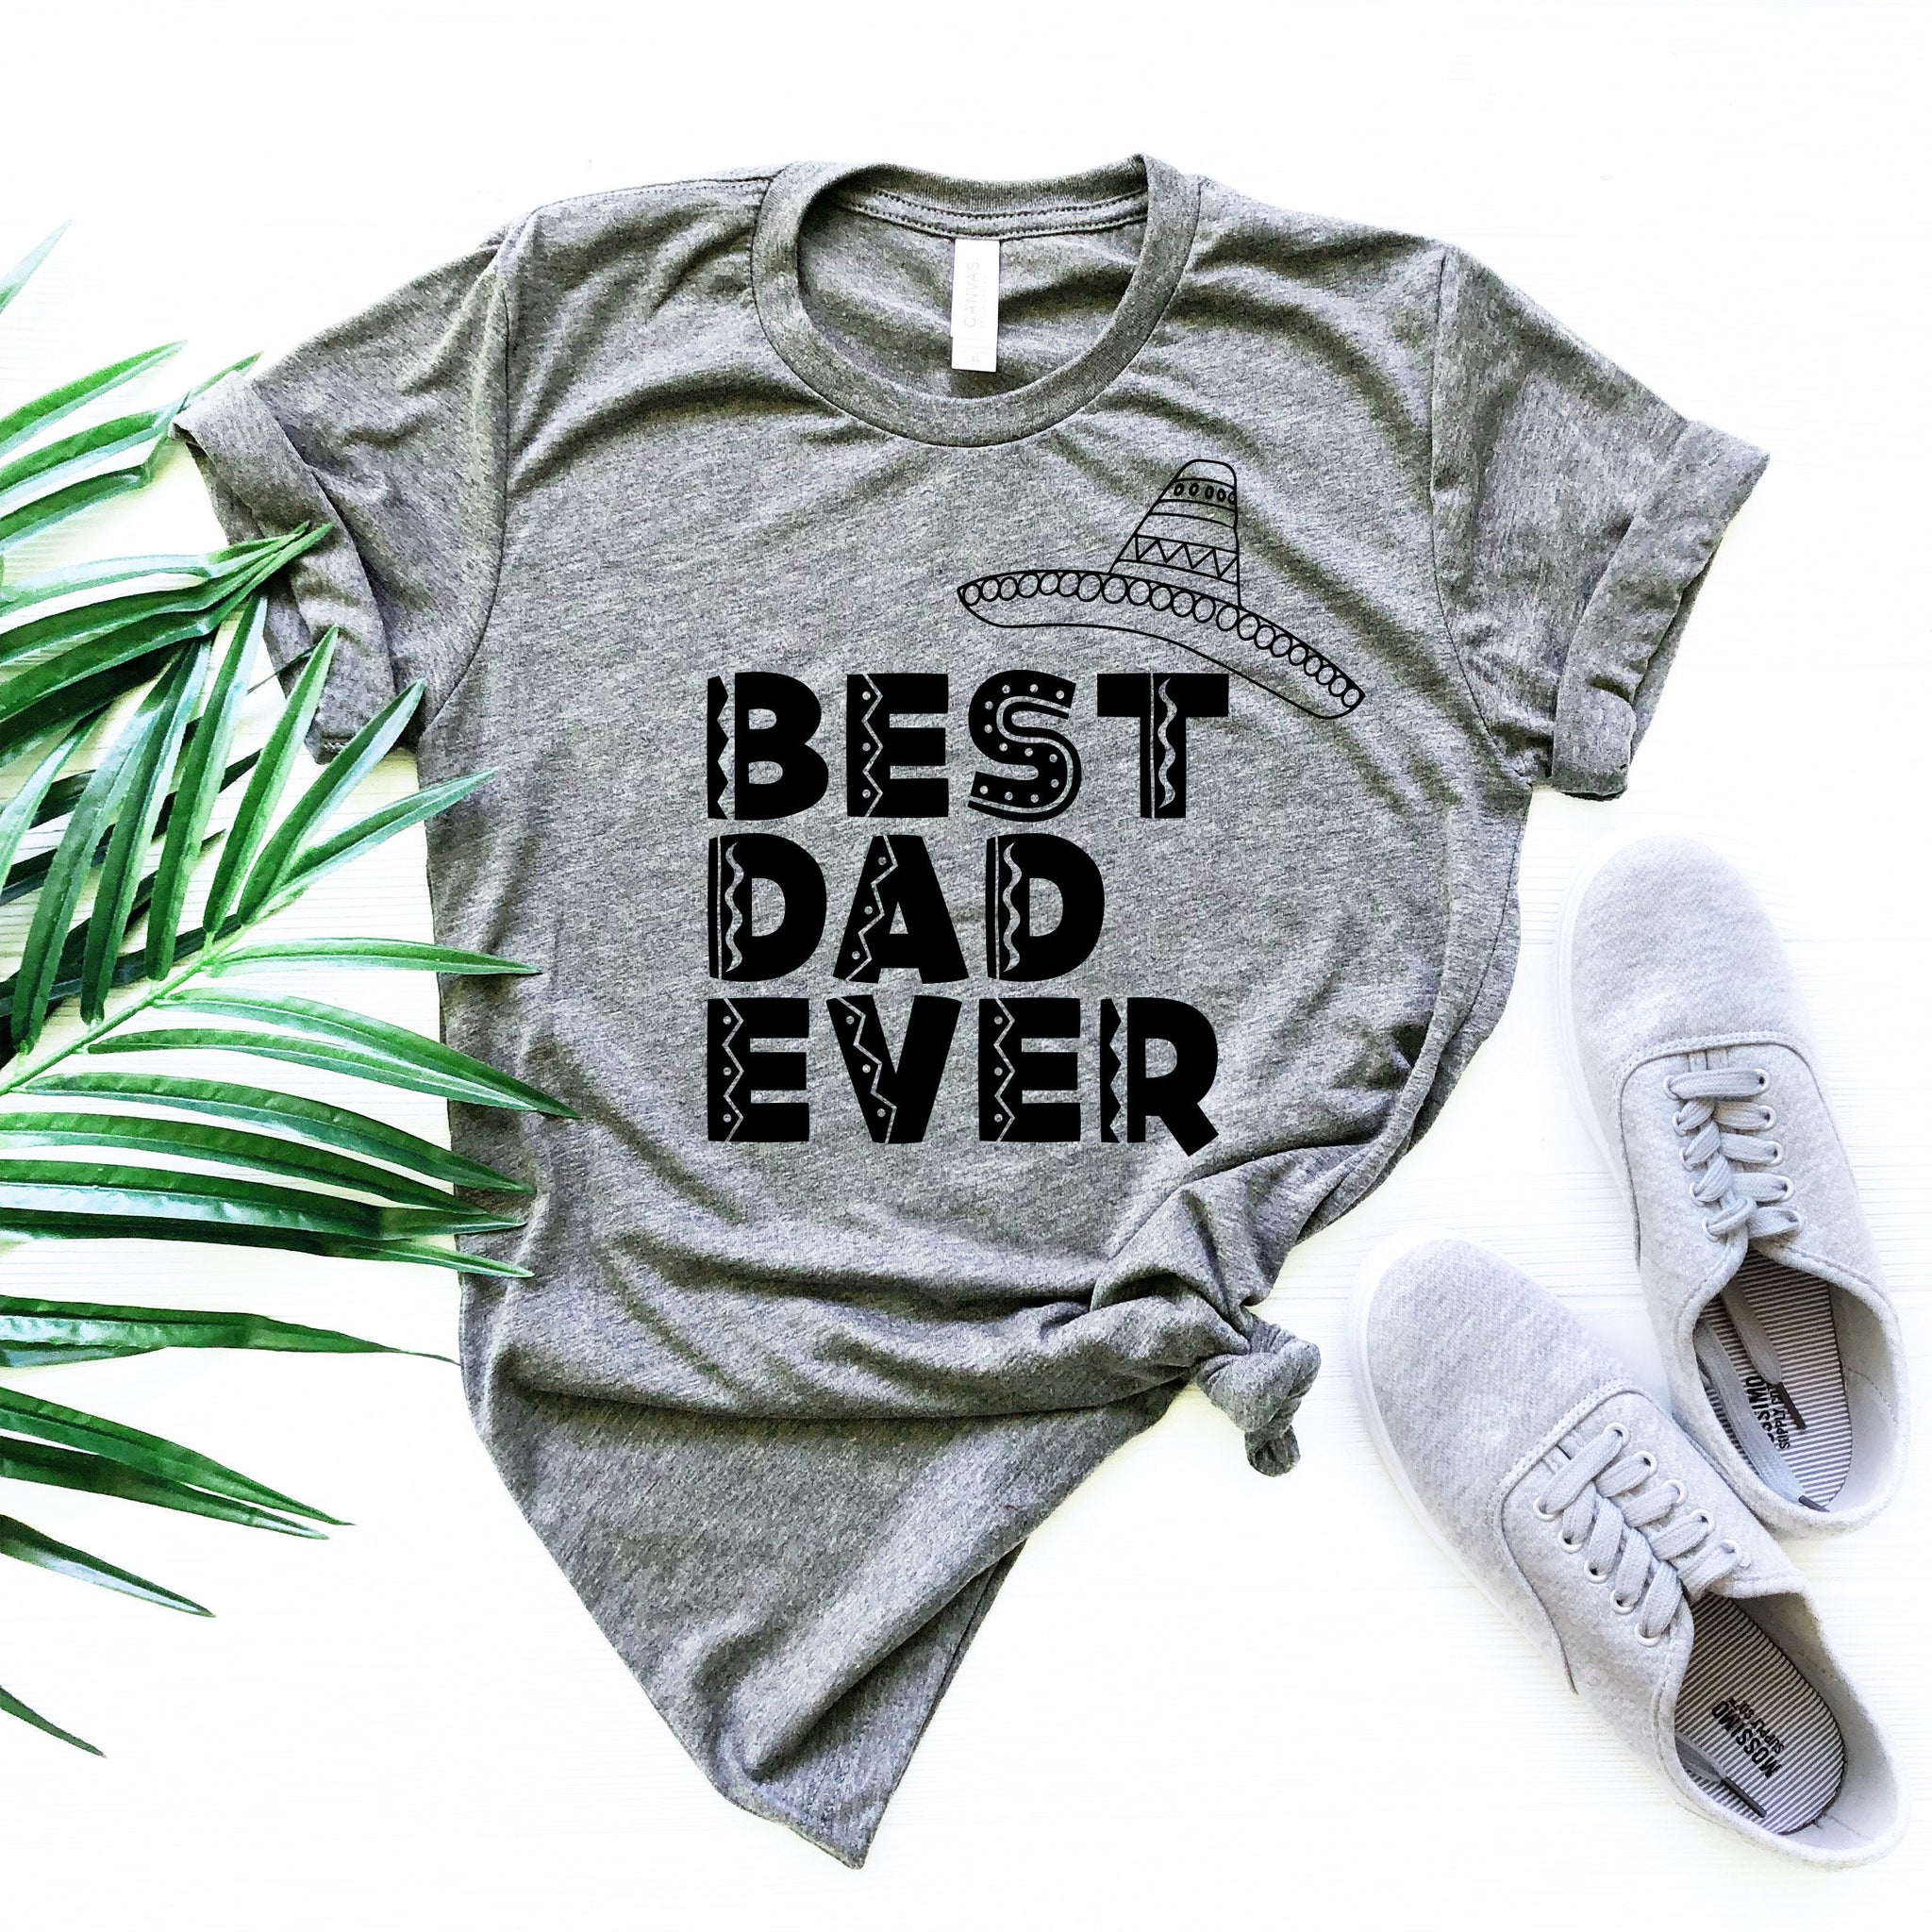 Funny Dad Tshirts for Fathers Day, Dad gift shirts, Dad shirts from daughter, Funny Shirts for dad men husband,Dad Birthday,Best Dad Ever - Fastdeliverytees.com